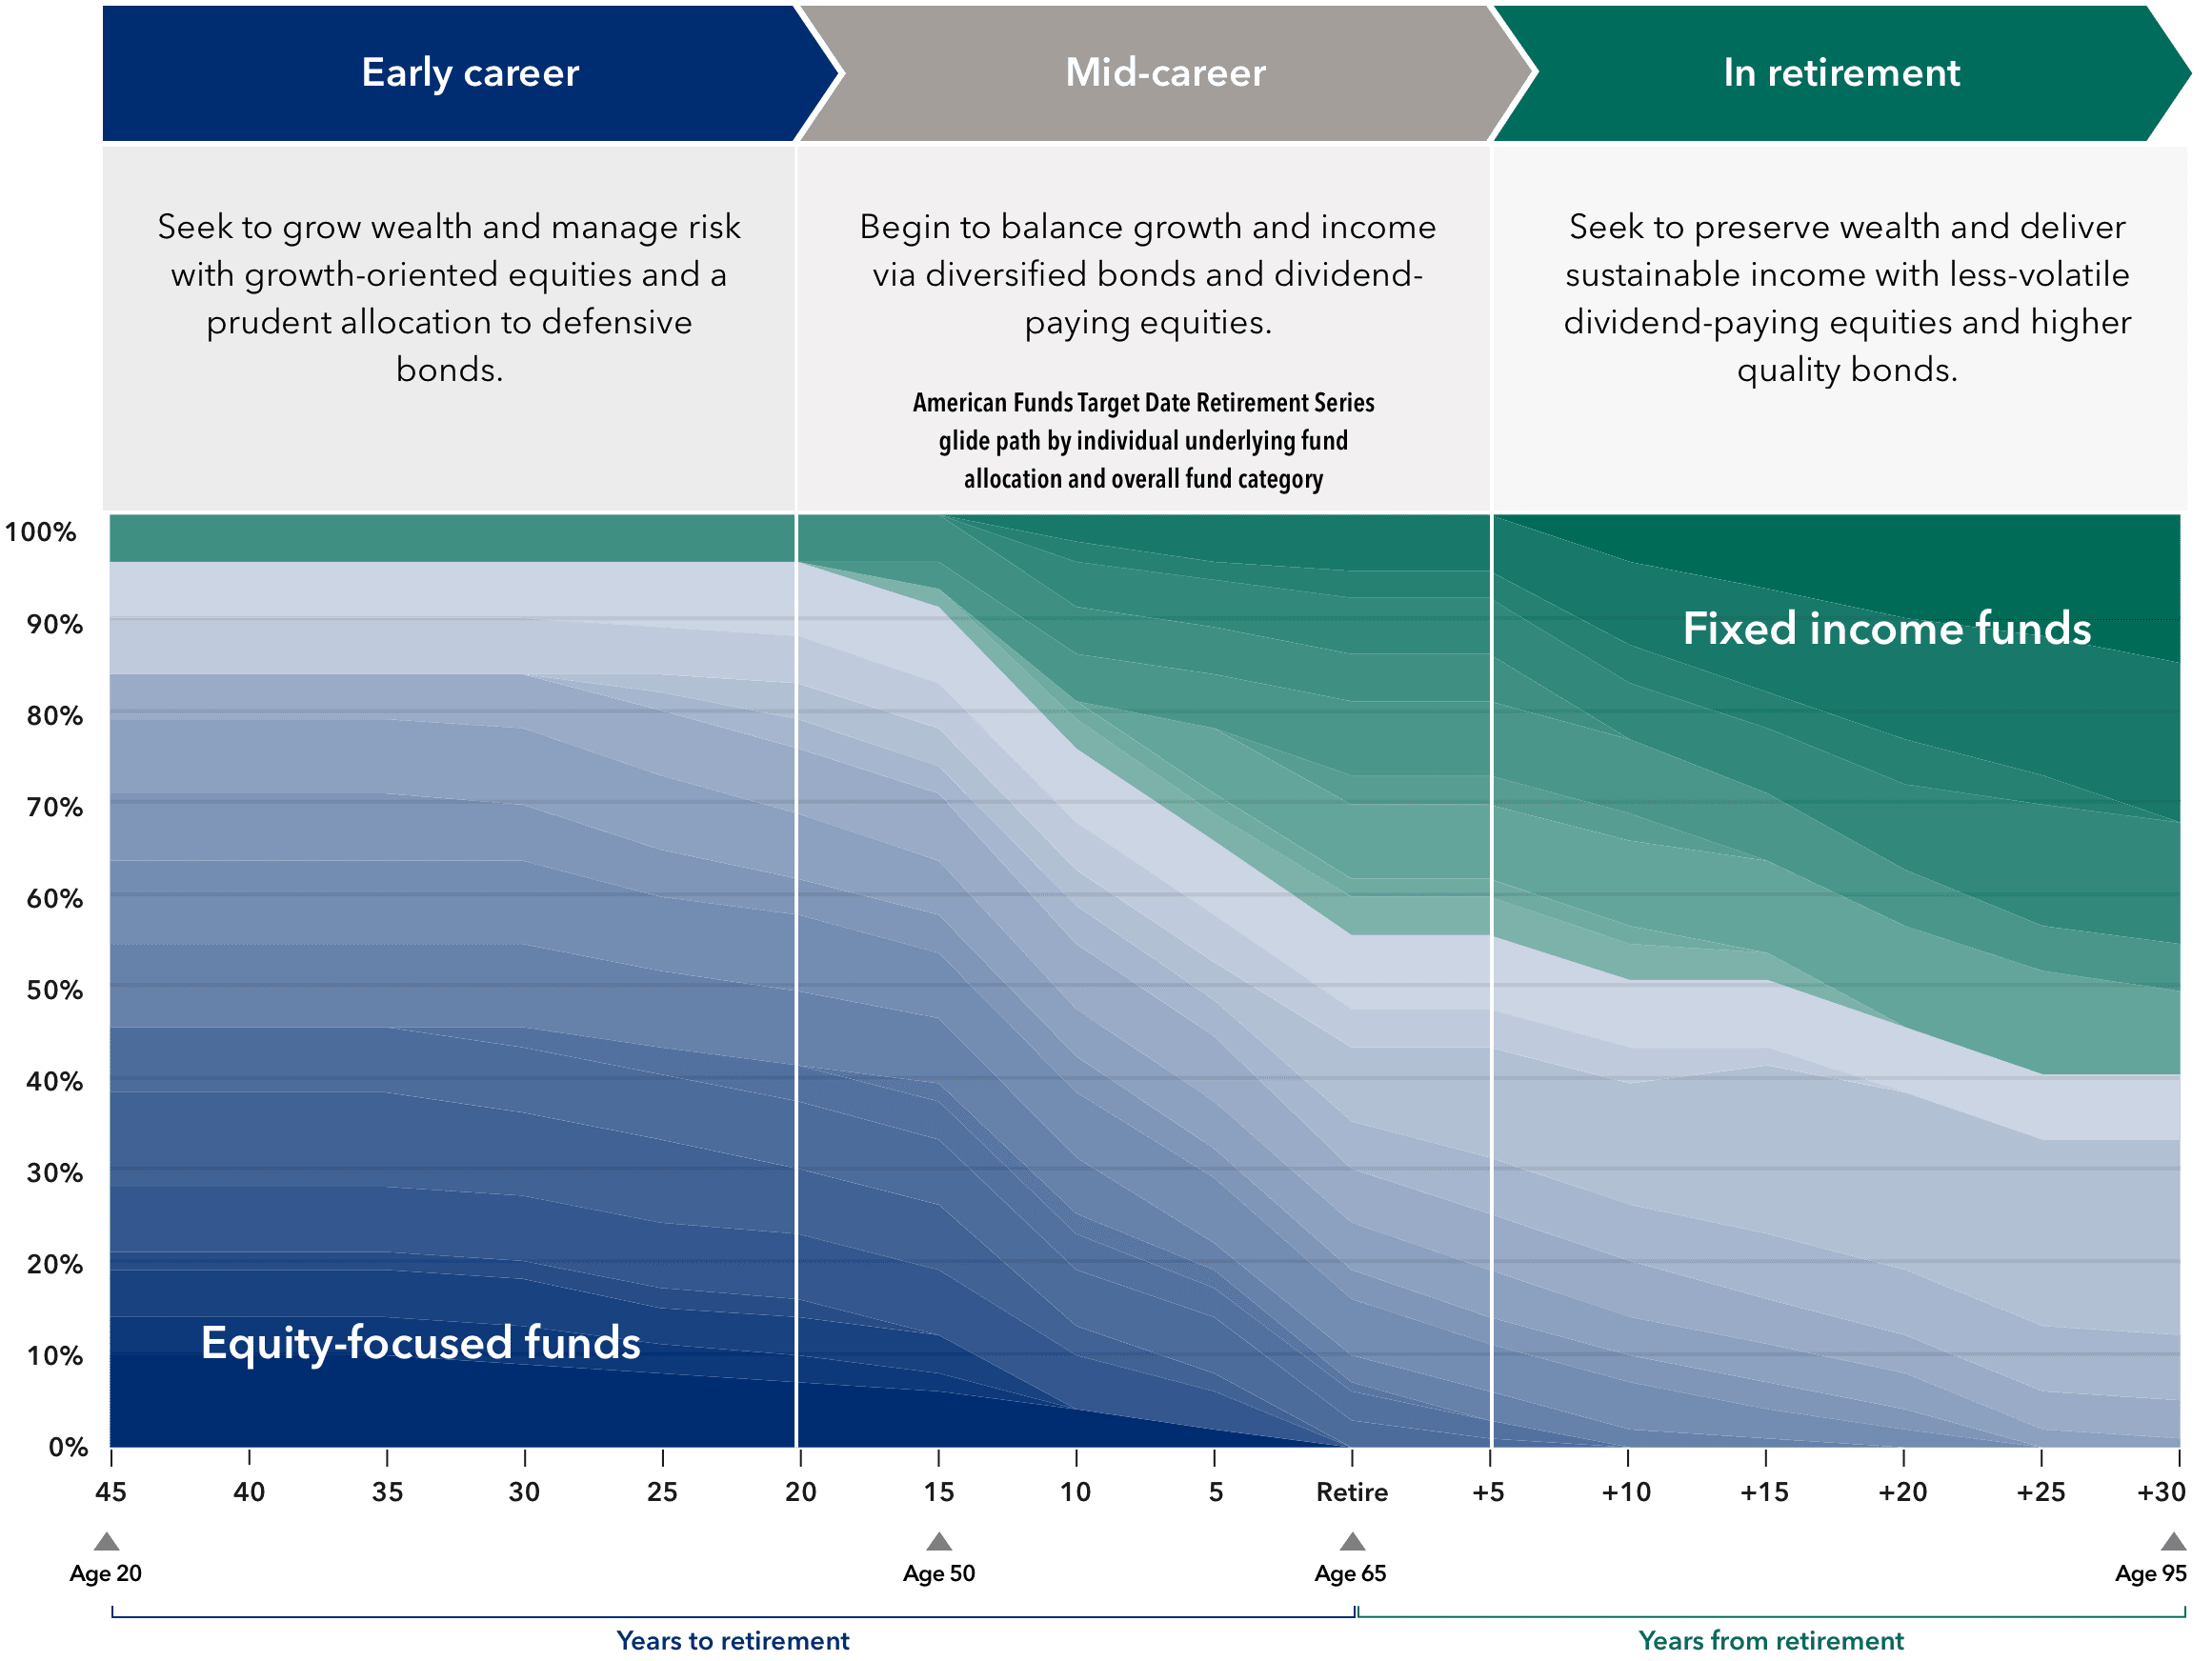 This chart is titled American Funds Target Date Retirement Series glide path by individual underlying fund allocation and overall fund category, and illustrates our strategic glide path shifting from a higher equity to a higher fixed income allocation over time while also explaining the shift in philosophy from wealth creation to wealth preservation. It features the early career which seeks to grow wealth and manage risk with growth-oriented equities and a prudent allocation to defensive bonds. The mid-career begins to balance growth and income versus diversified bonds and dividend-paying equities. The in-retirement stage seeks to preserve wealth and deliver sustainable income with less-volatile dividend-paying equities and higher quality bonds.